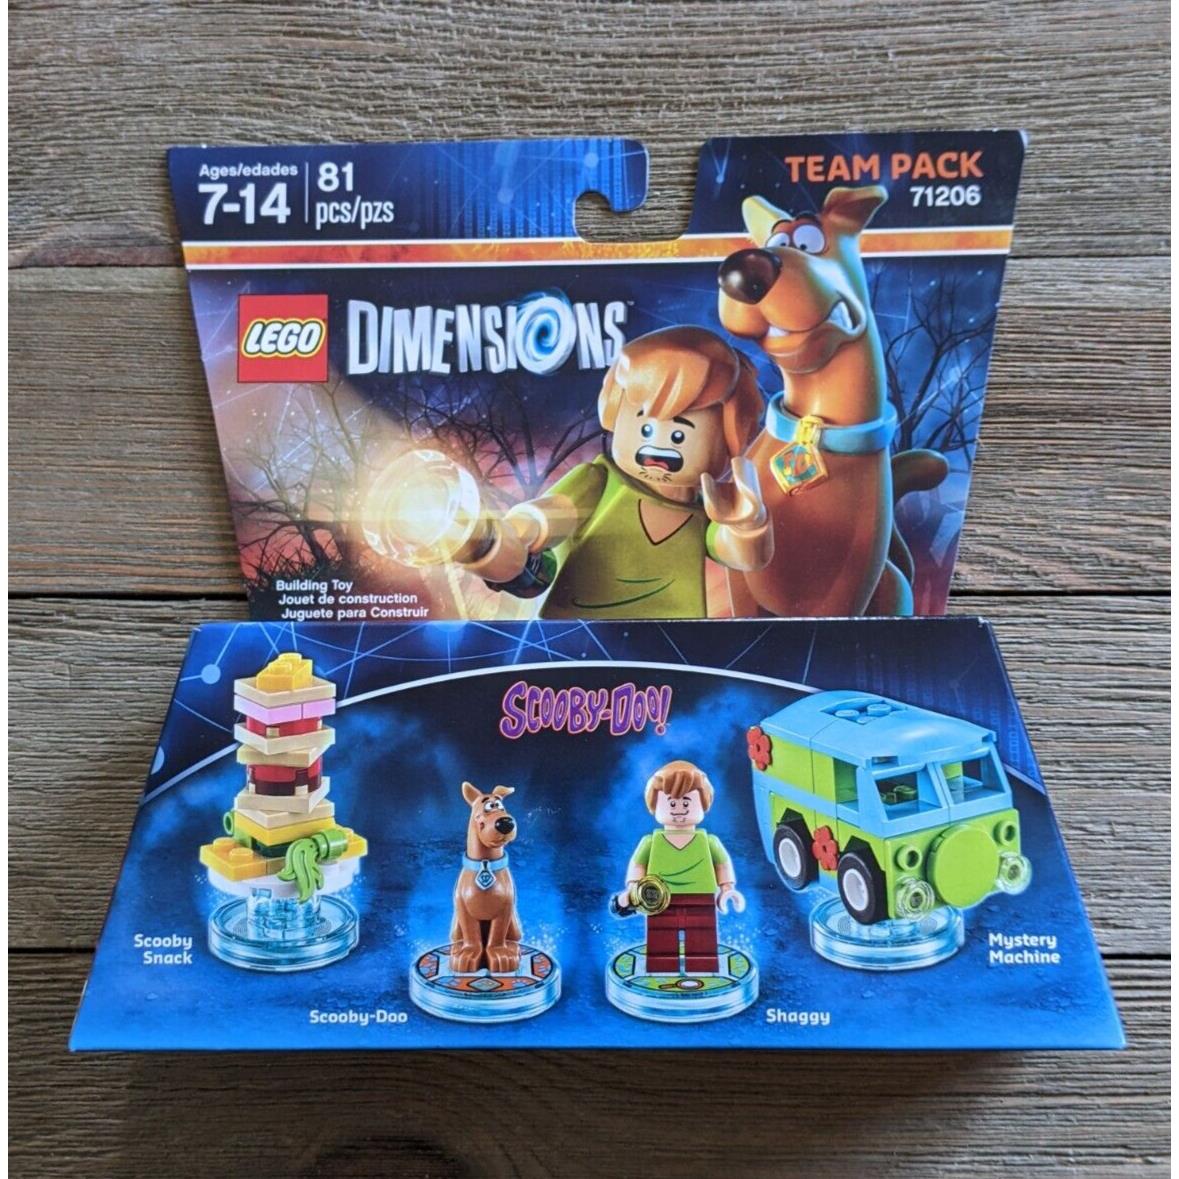 Lego Dimensions 71206 Scooby-doo Shaggy Team Pack